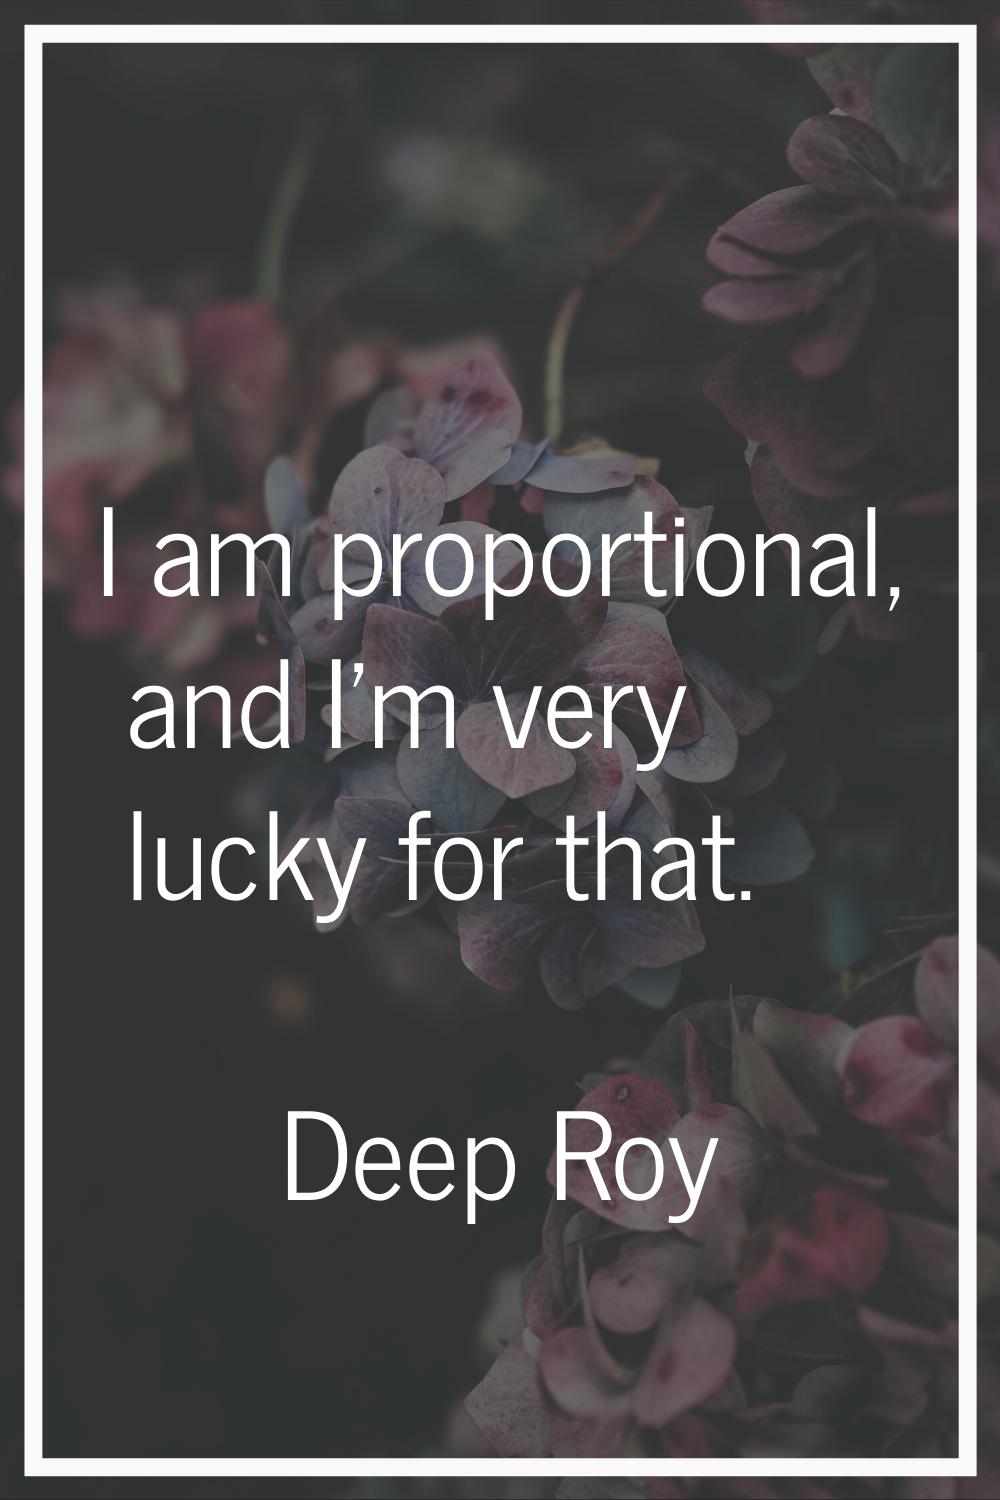 I am proportional, and I'm very lucky for that.